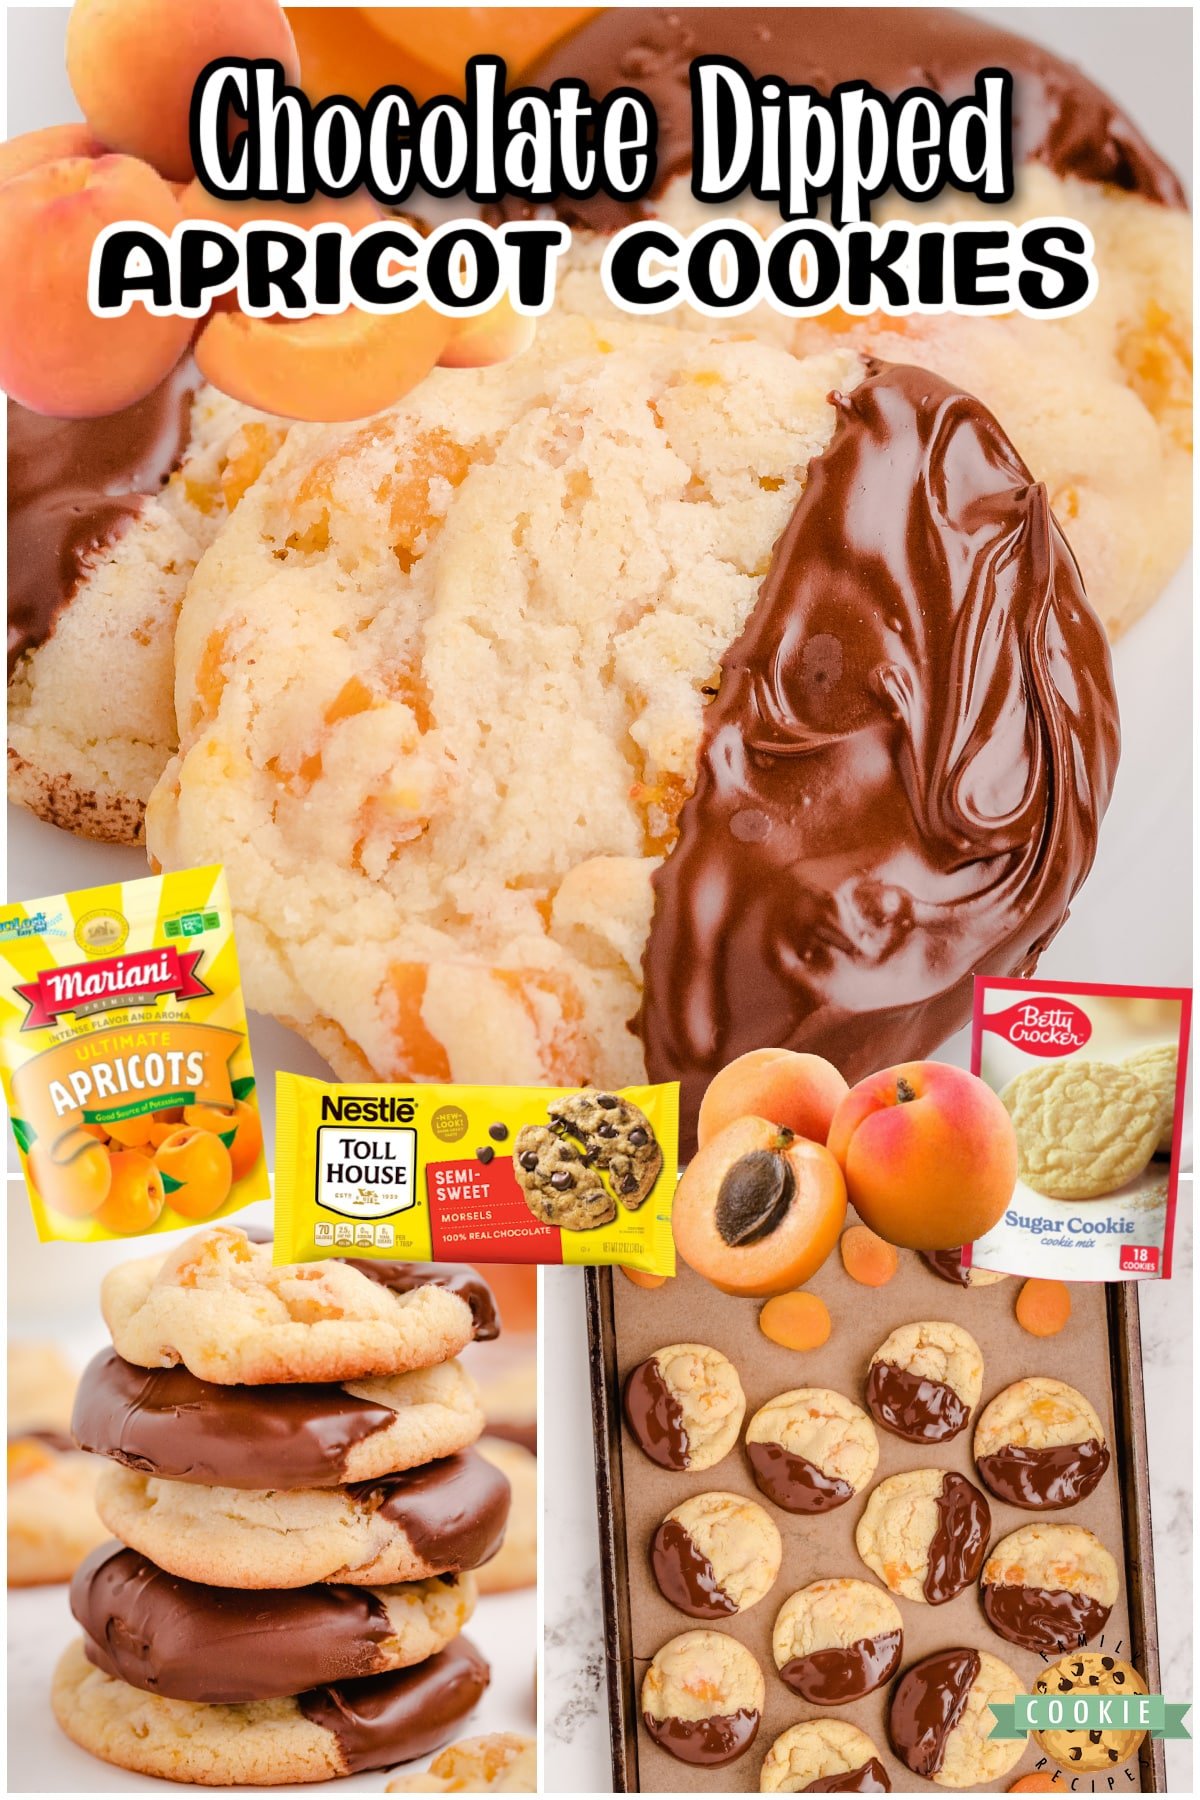 Dark Chocolate Apricot Cookies have tangy dried apricots in the sweet cookie dough! The addition of the dark chocolate on these apricot sugar cookies is simply decadent!